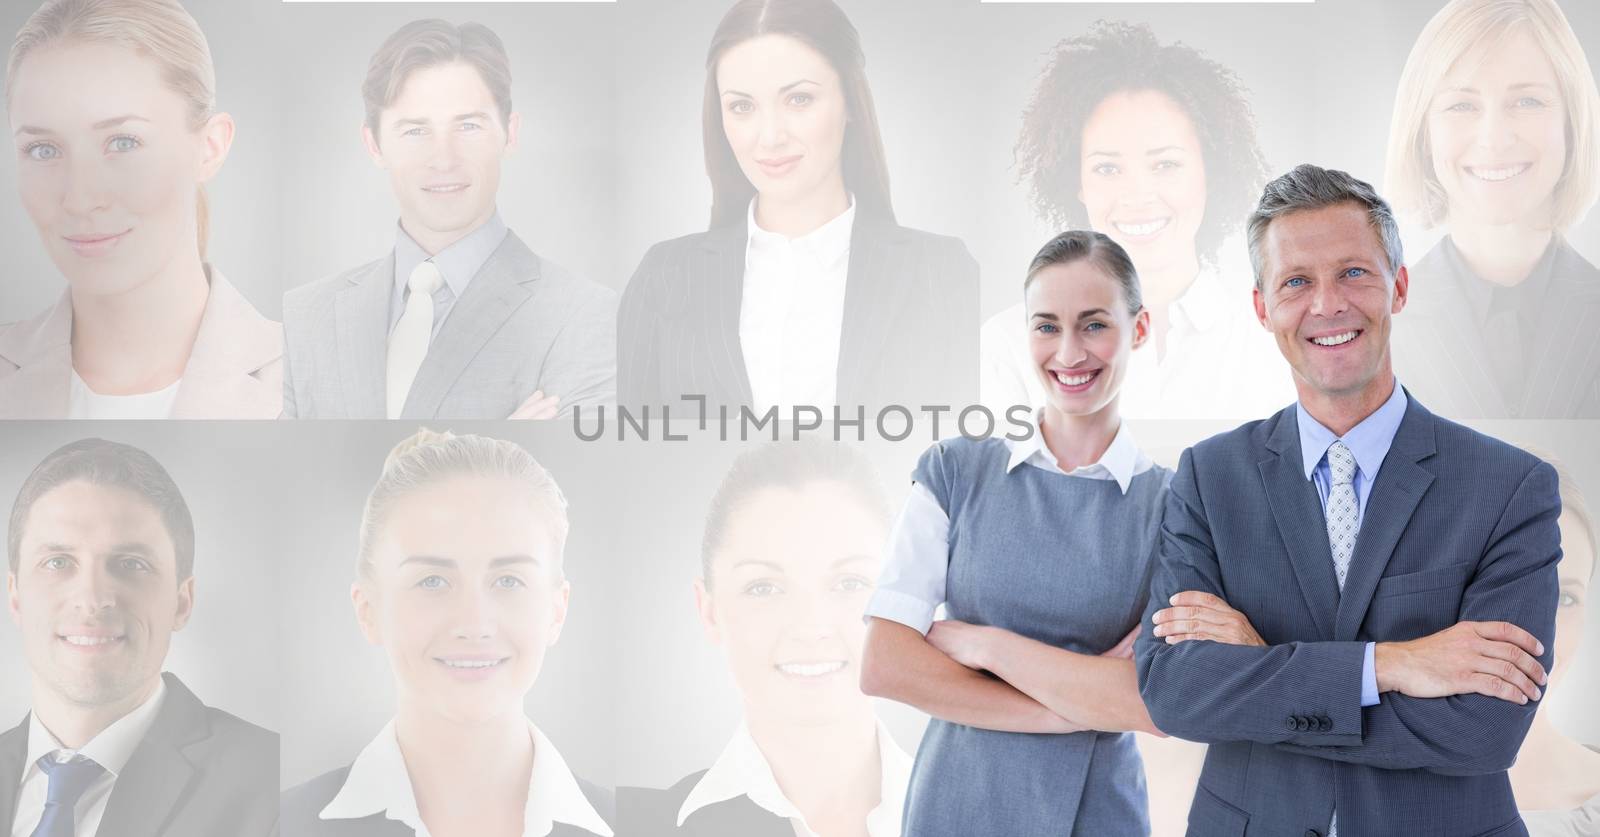 Digital composite of Business people with portrait profiles of different people in background